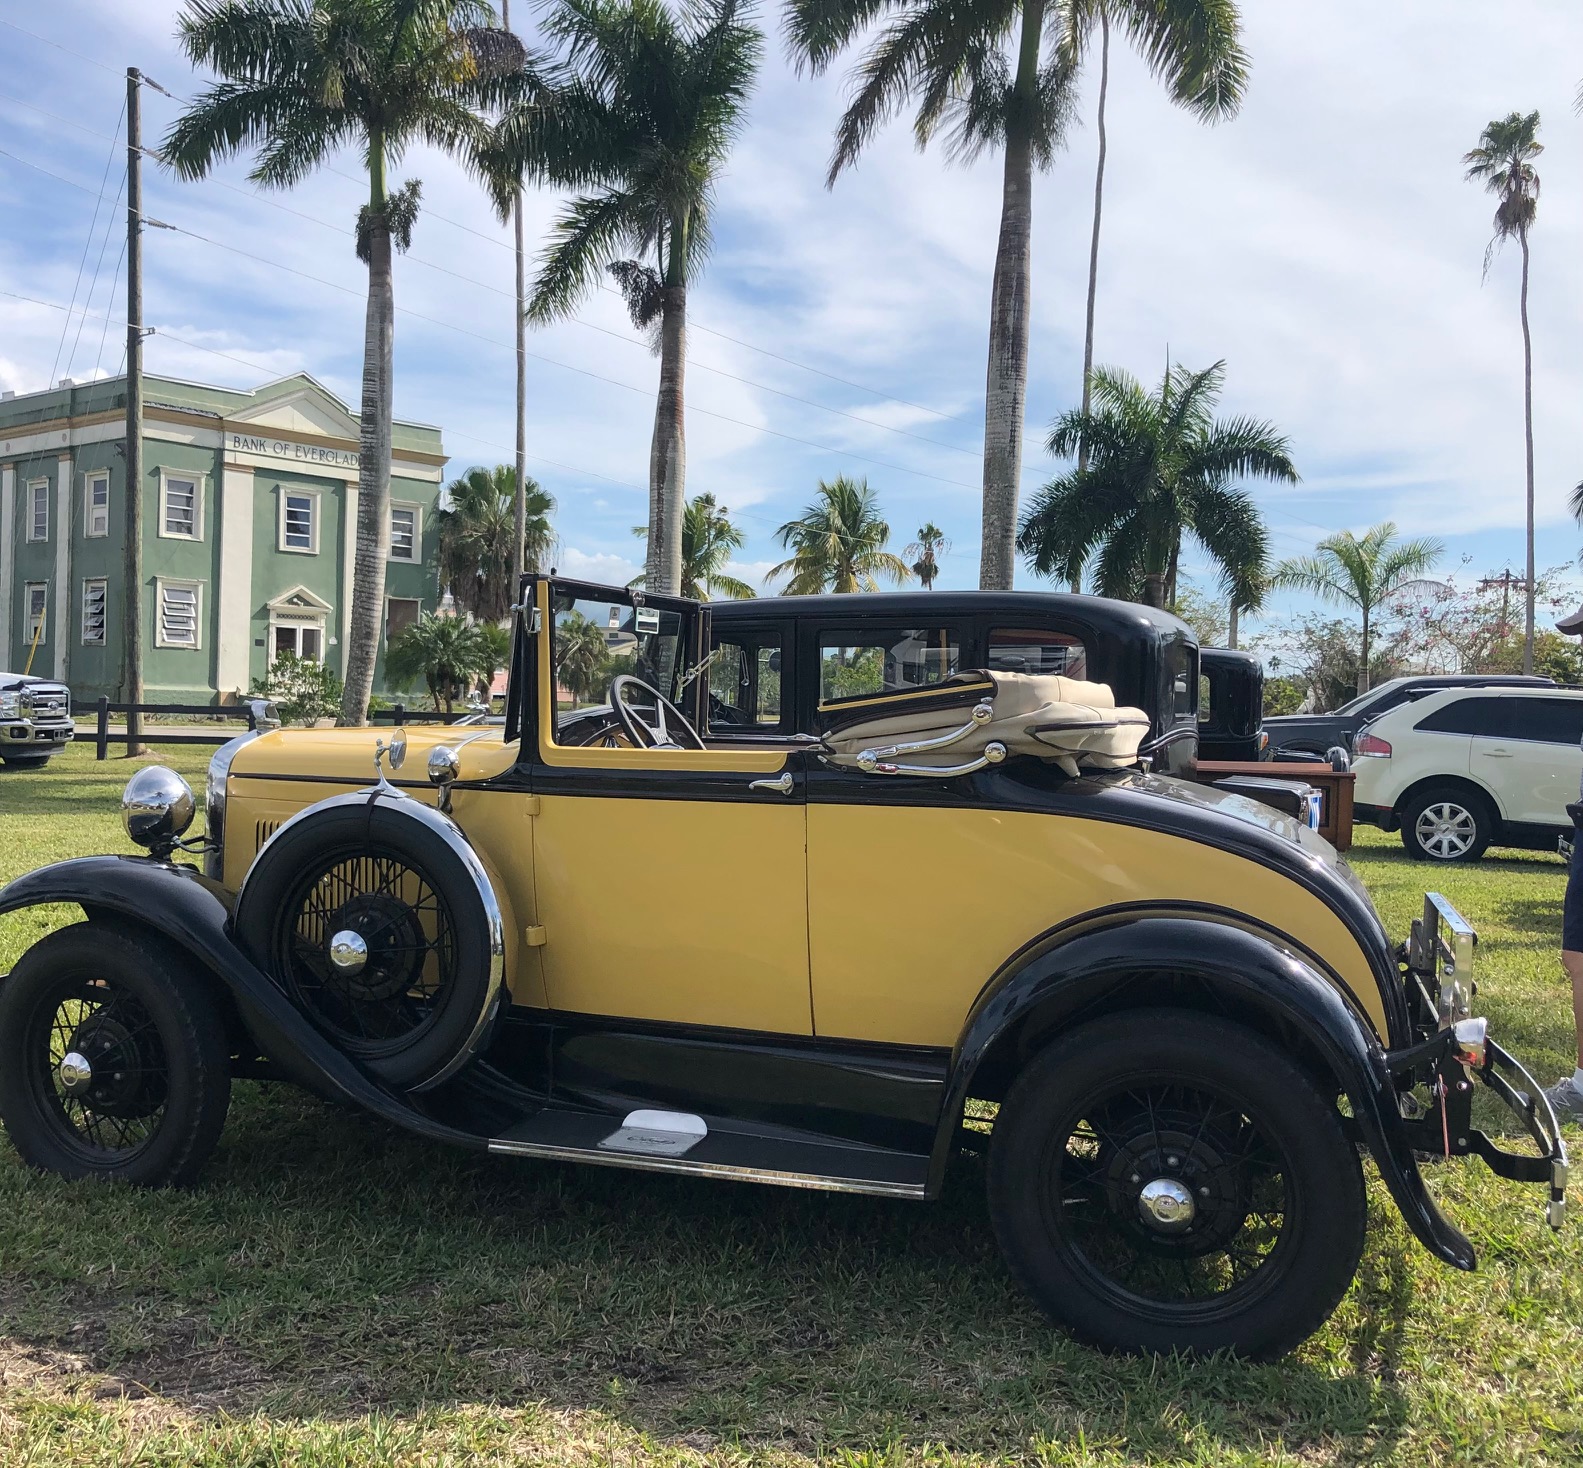 A vintage yellow-and-black car sits in front of the Bank of Everglades.